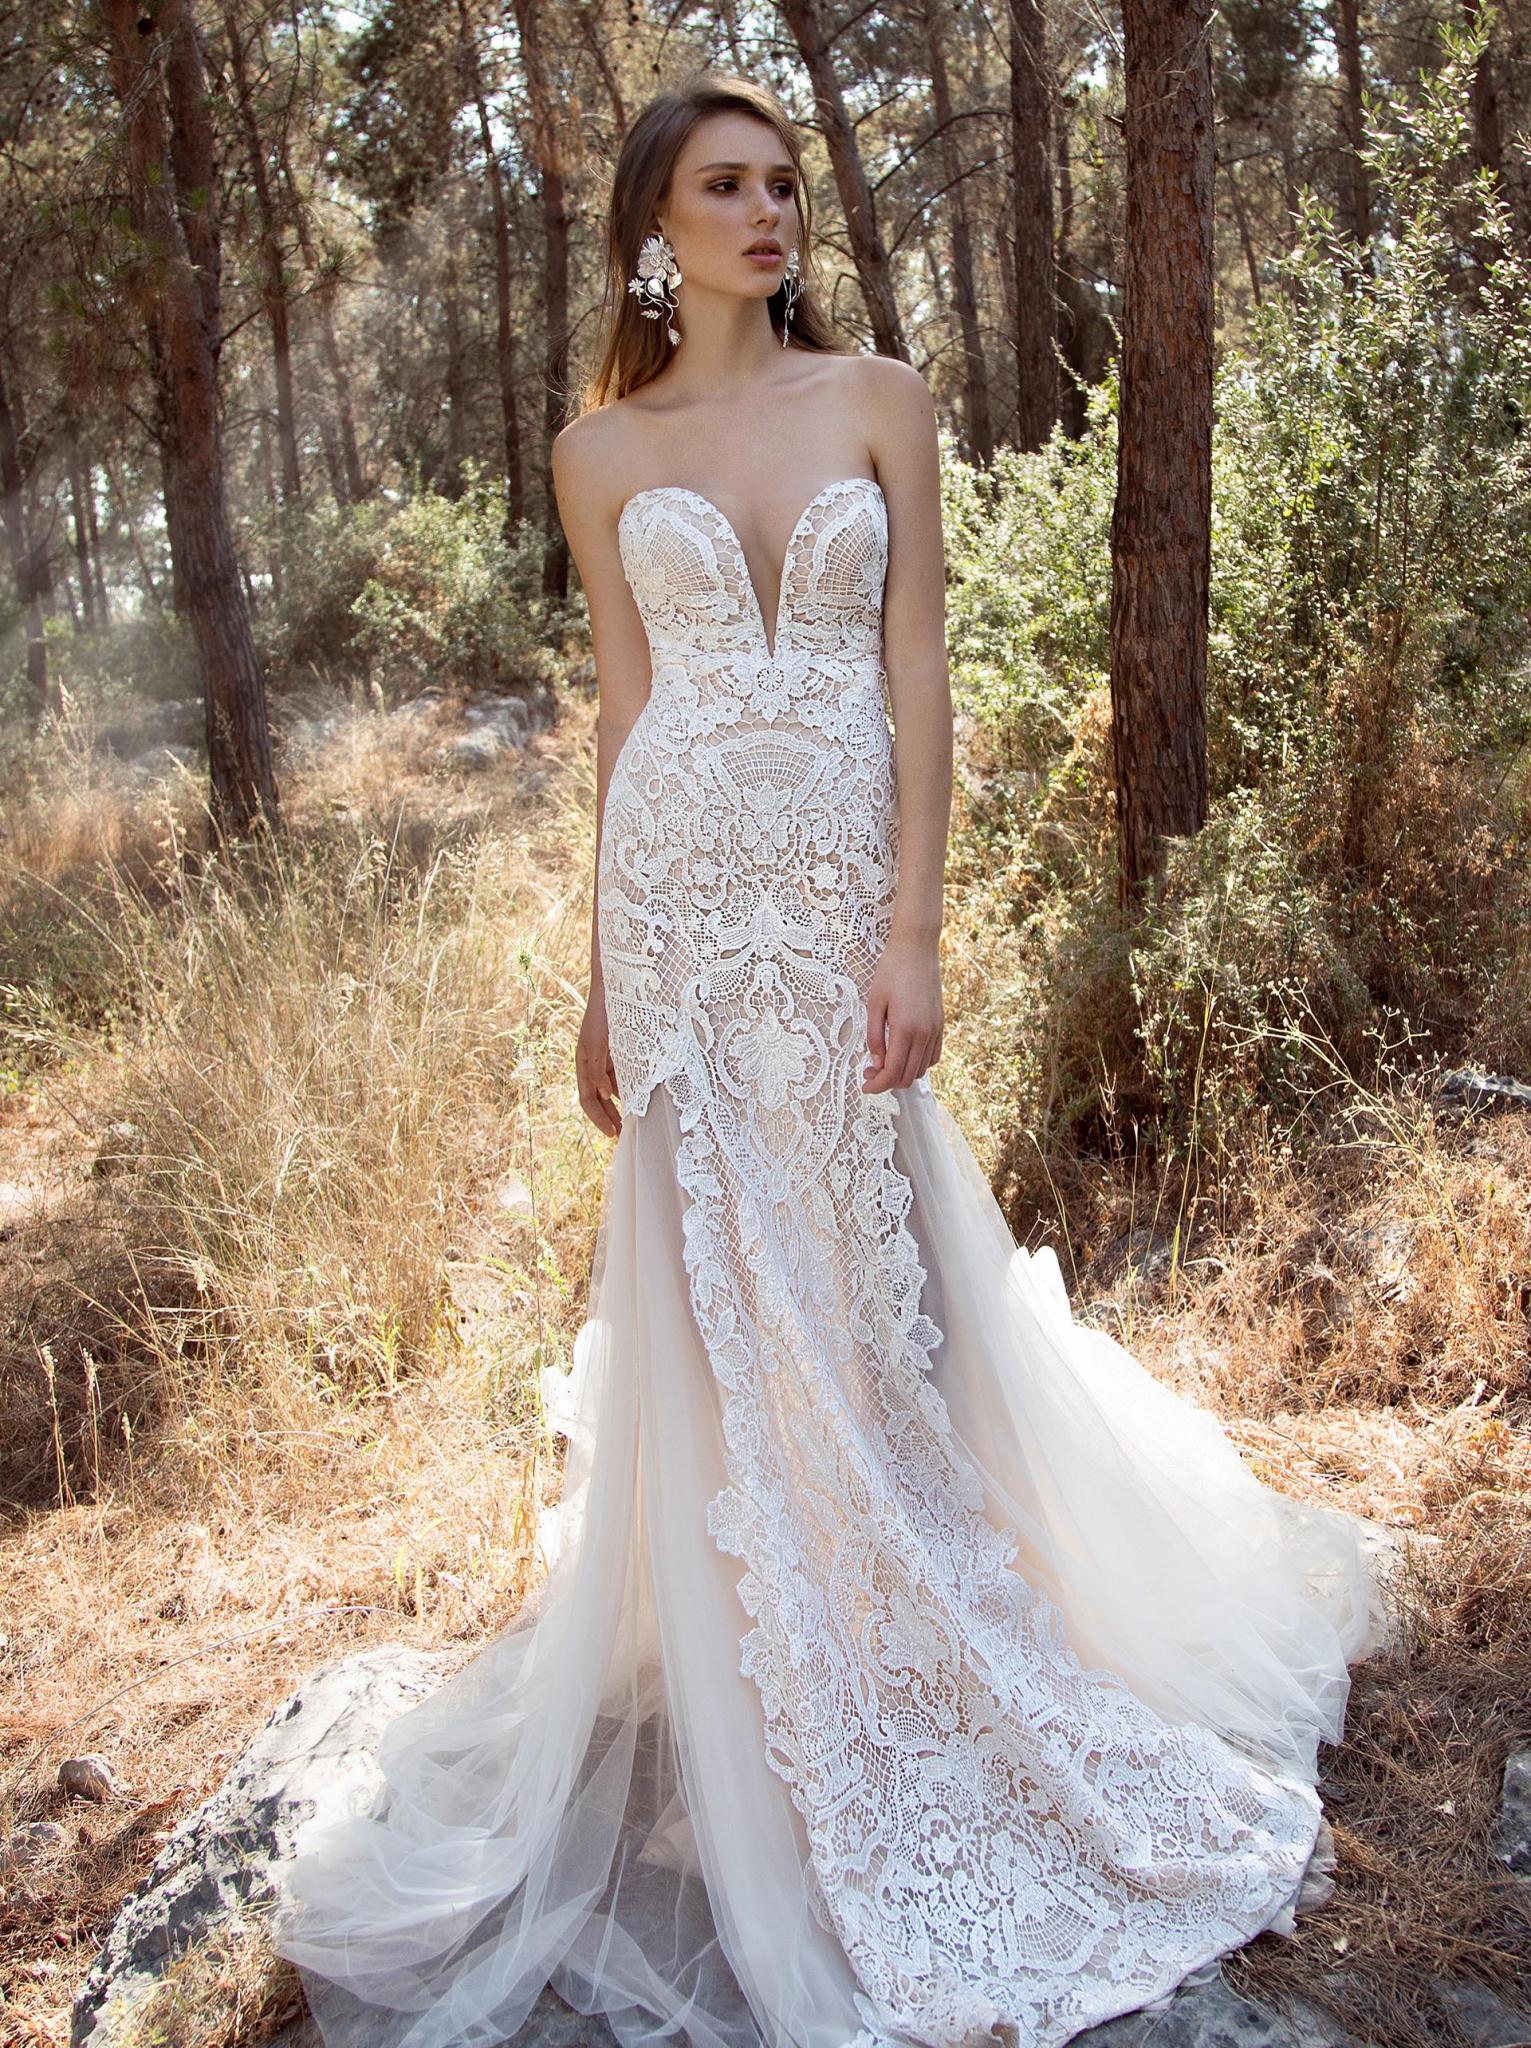 View product : GALA-912